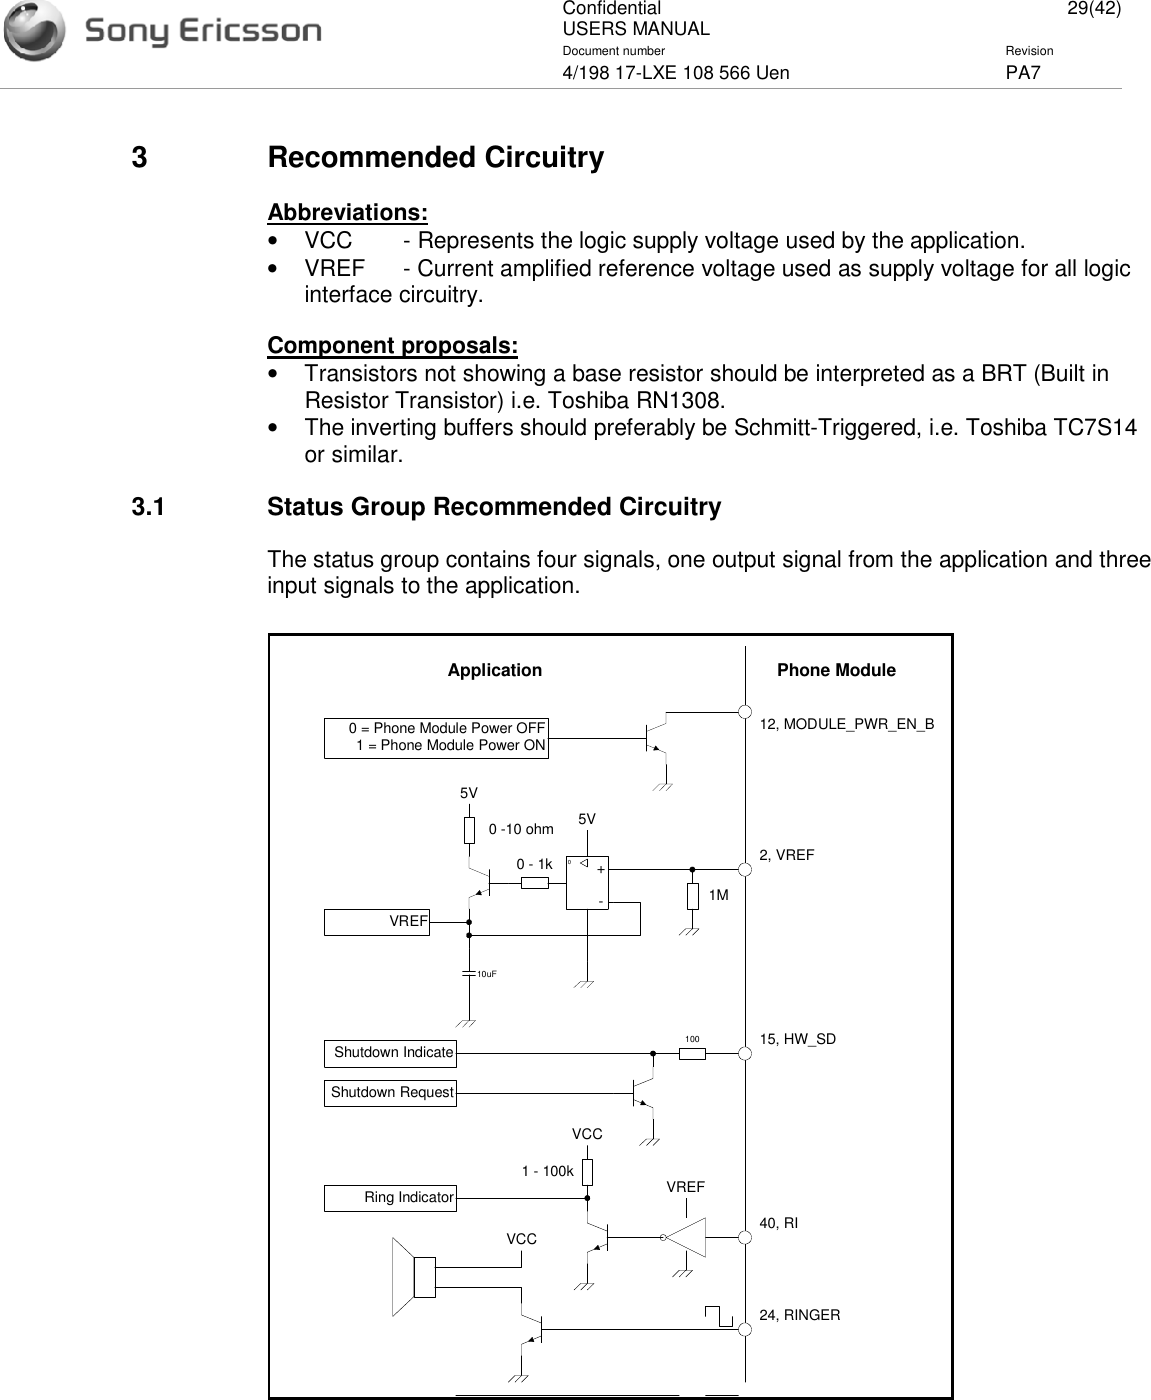 ConfidentialUSERS MANUAL 29(42)Document number Revision4/198 17-LXE 108 566 Uen PA73 Recommended CircuitryAbbreviations:•VCC - Represents the logic supply voltage used by the application.•VREF - Current amplified reference voltage used as supply voltage for all logicinterface circuitry.Component proposals:•Transistors not showing a base resistor should be interpreted as a BRT (Built inResistor Transistor) i.e. Toshiba RN1308.•The inverting buffers should preferably be Schmitt-Triggered, i.e. Toshiba TC7S14or similar.3.1 Status Group Recommended CircuitryThe status group contains four signals, one output signal from the application and threeinput signals to the application.Phone ModuleApplication12, MODULE_PWR_EN_B0 = Phone Module Power OFF1 = Phone Module Power ON+-00 - 1k0 -10 ohm5V2, VREF1M10uFVREF5VVREF40, RI1 - 100kVCCRing Indicator24, RINGERVCC15, HW_SD100Shutdown RequestShutdown Indicate